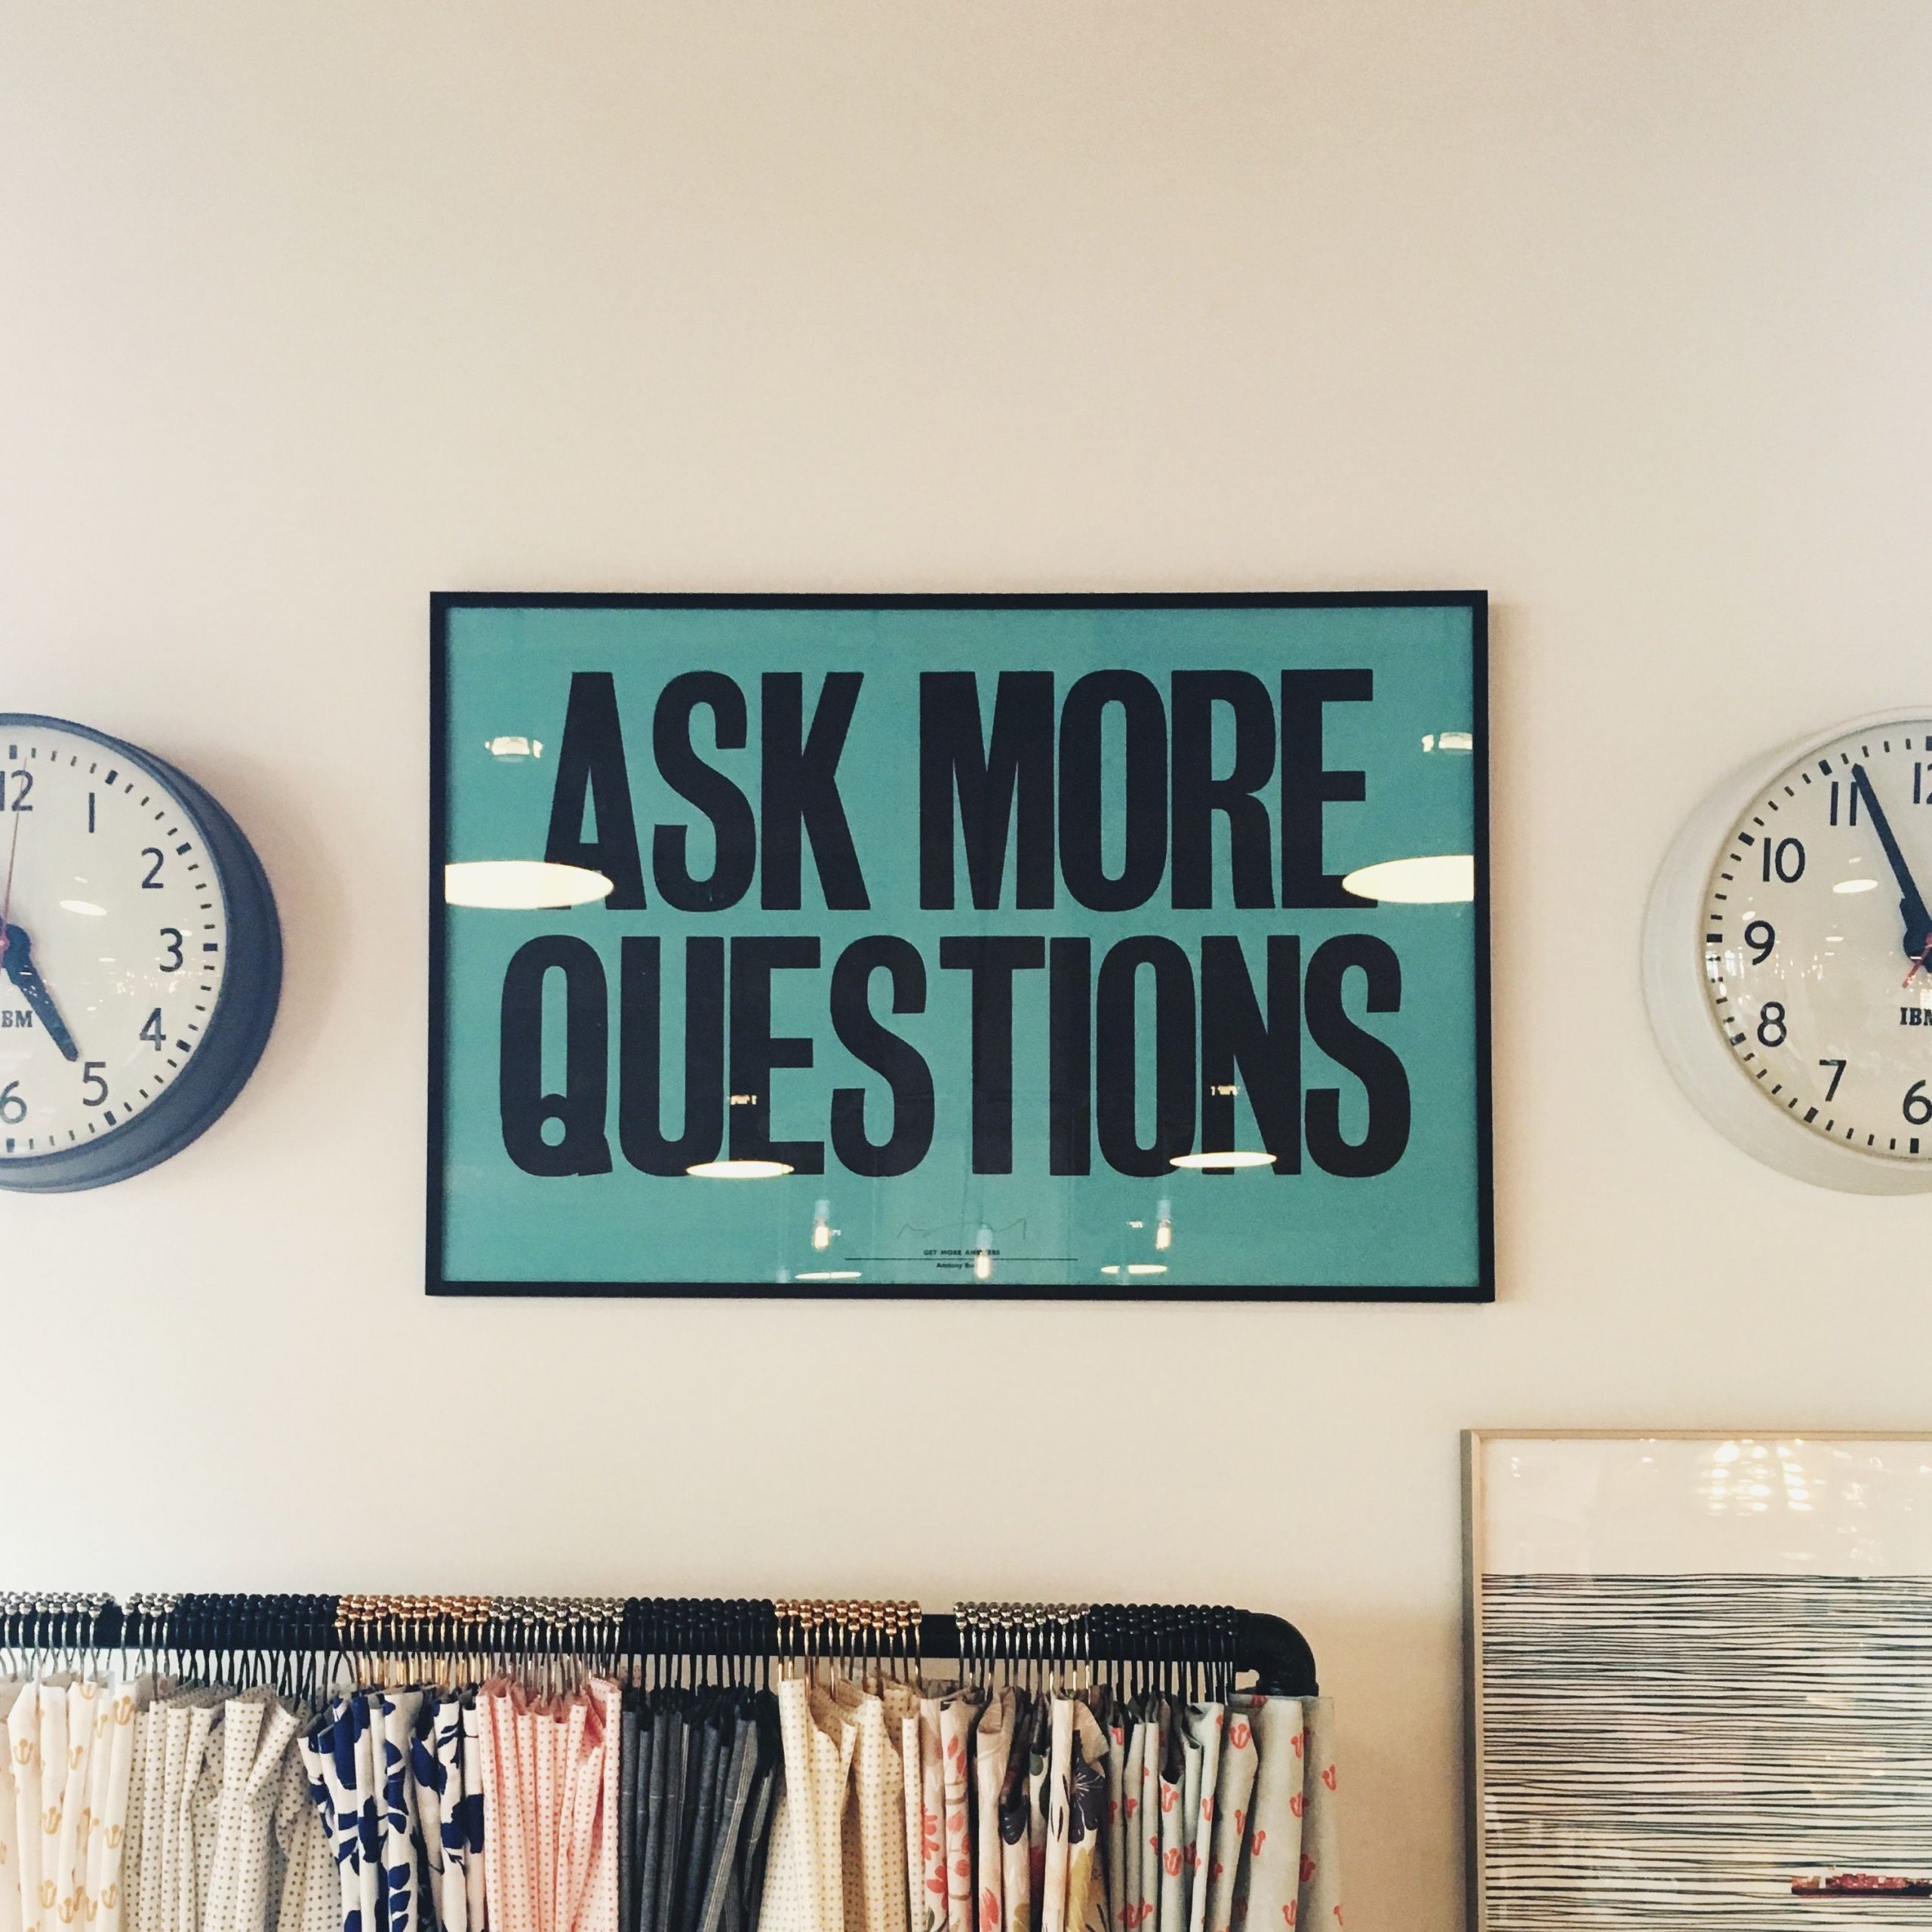 Ask more questions signage